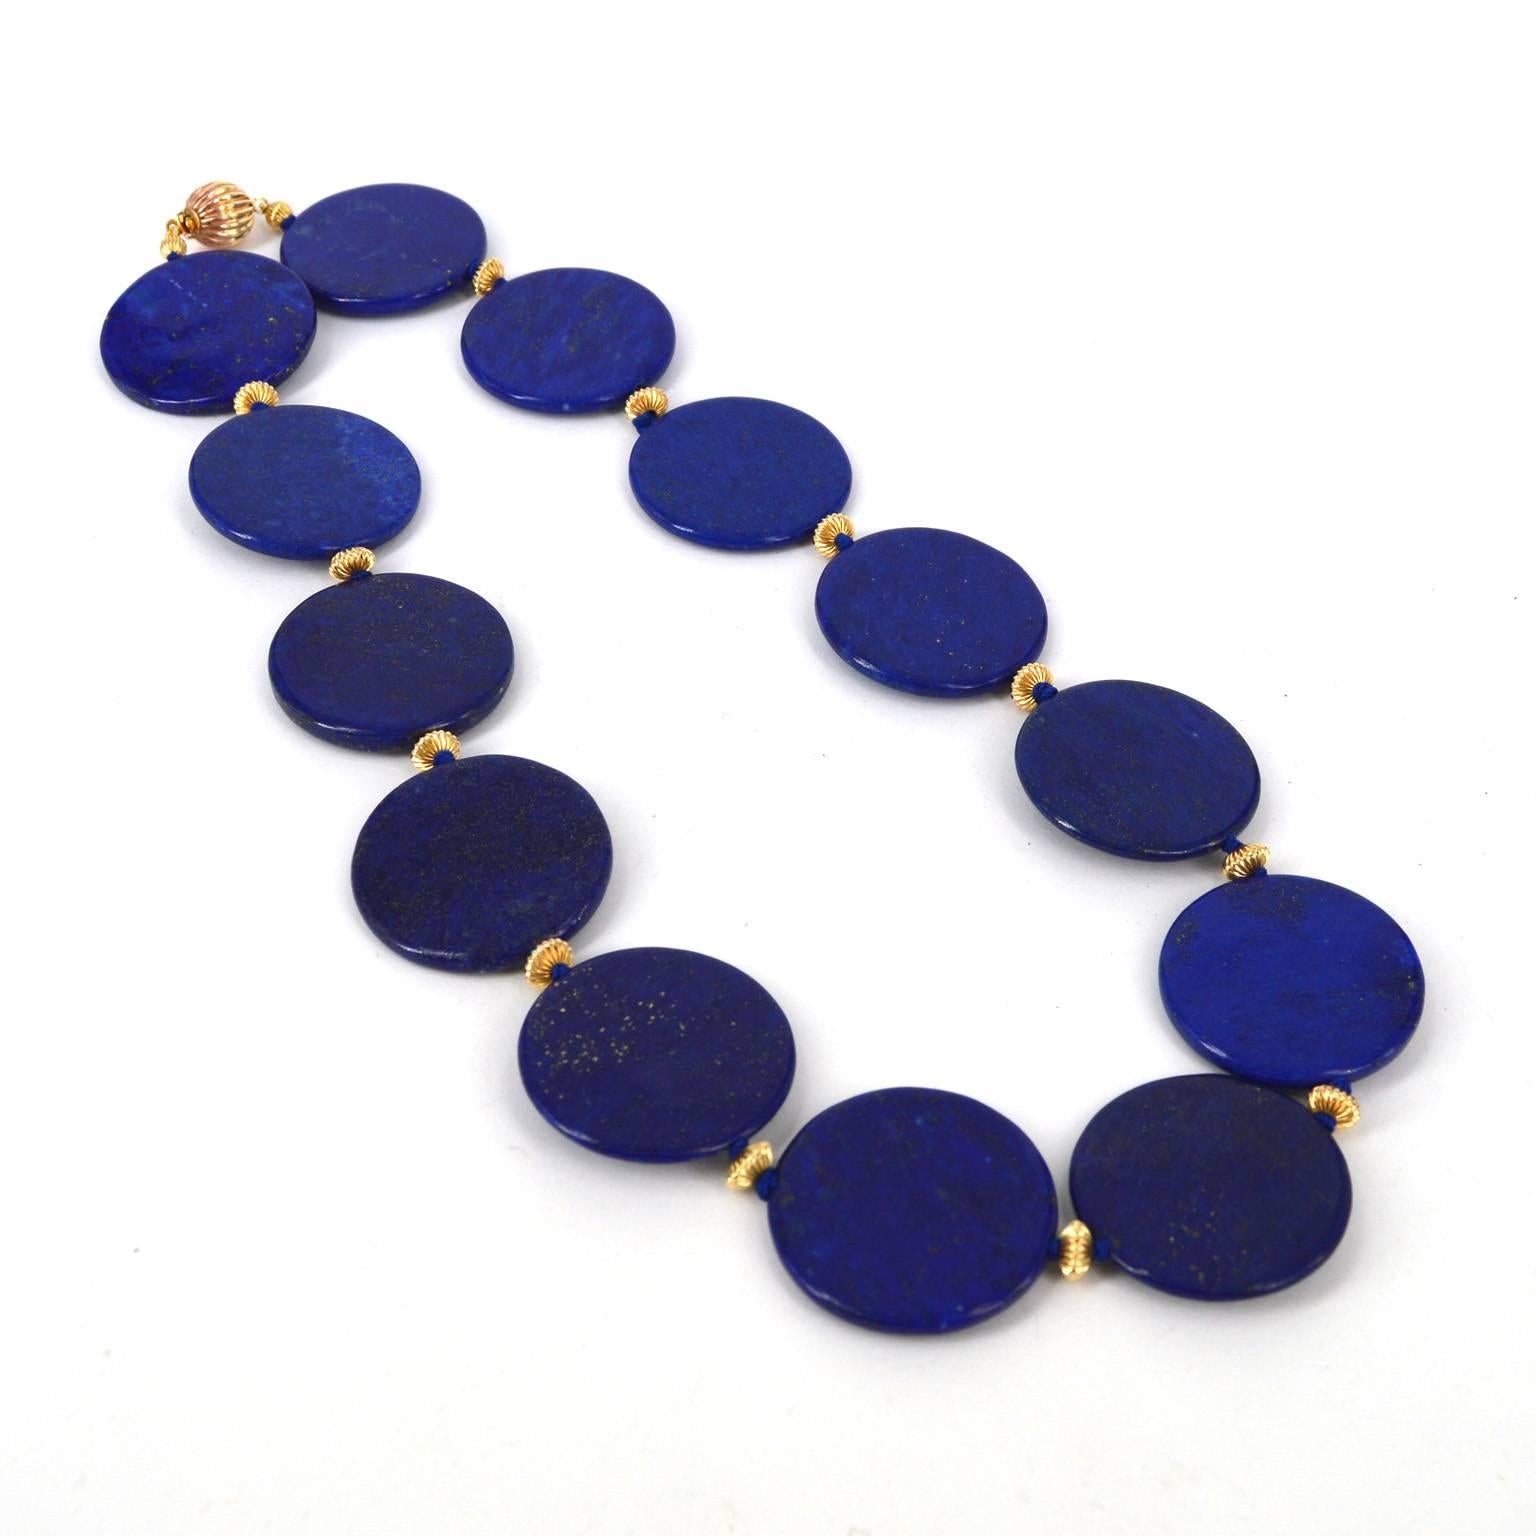 30mm polished flat disk Lapis Lazuli beads hand knotted on blue thread with 14k gold filled corrugated roundels and a 14k gold filled corrugated 14mm round clasp.
Total length of necklace 48cm.

All stones are natural and as such may include natural